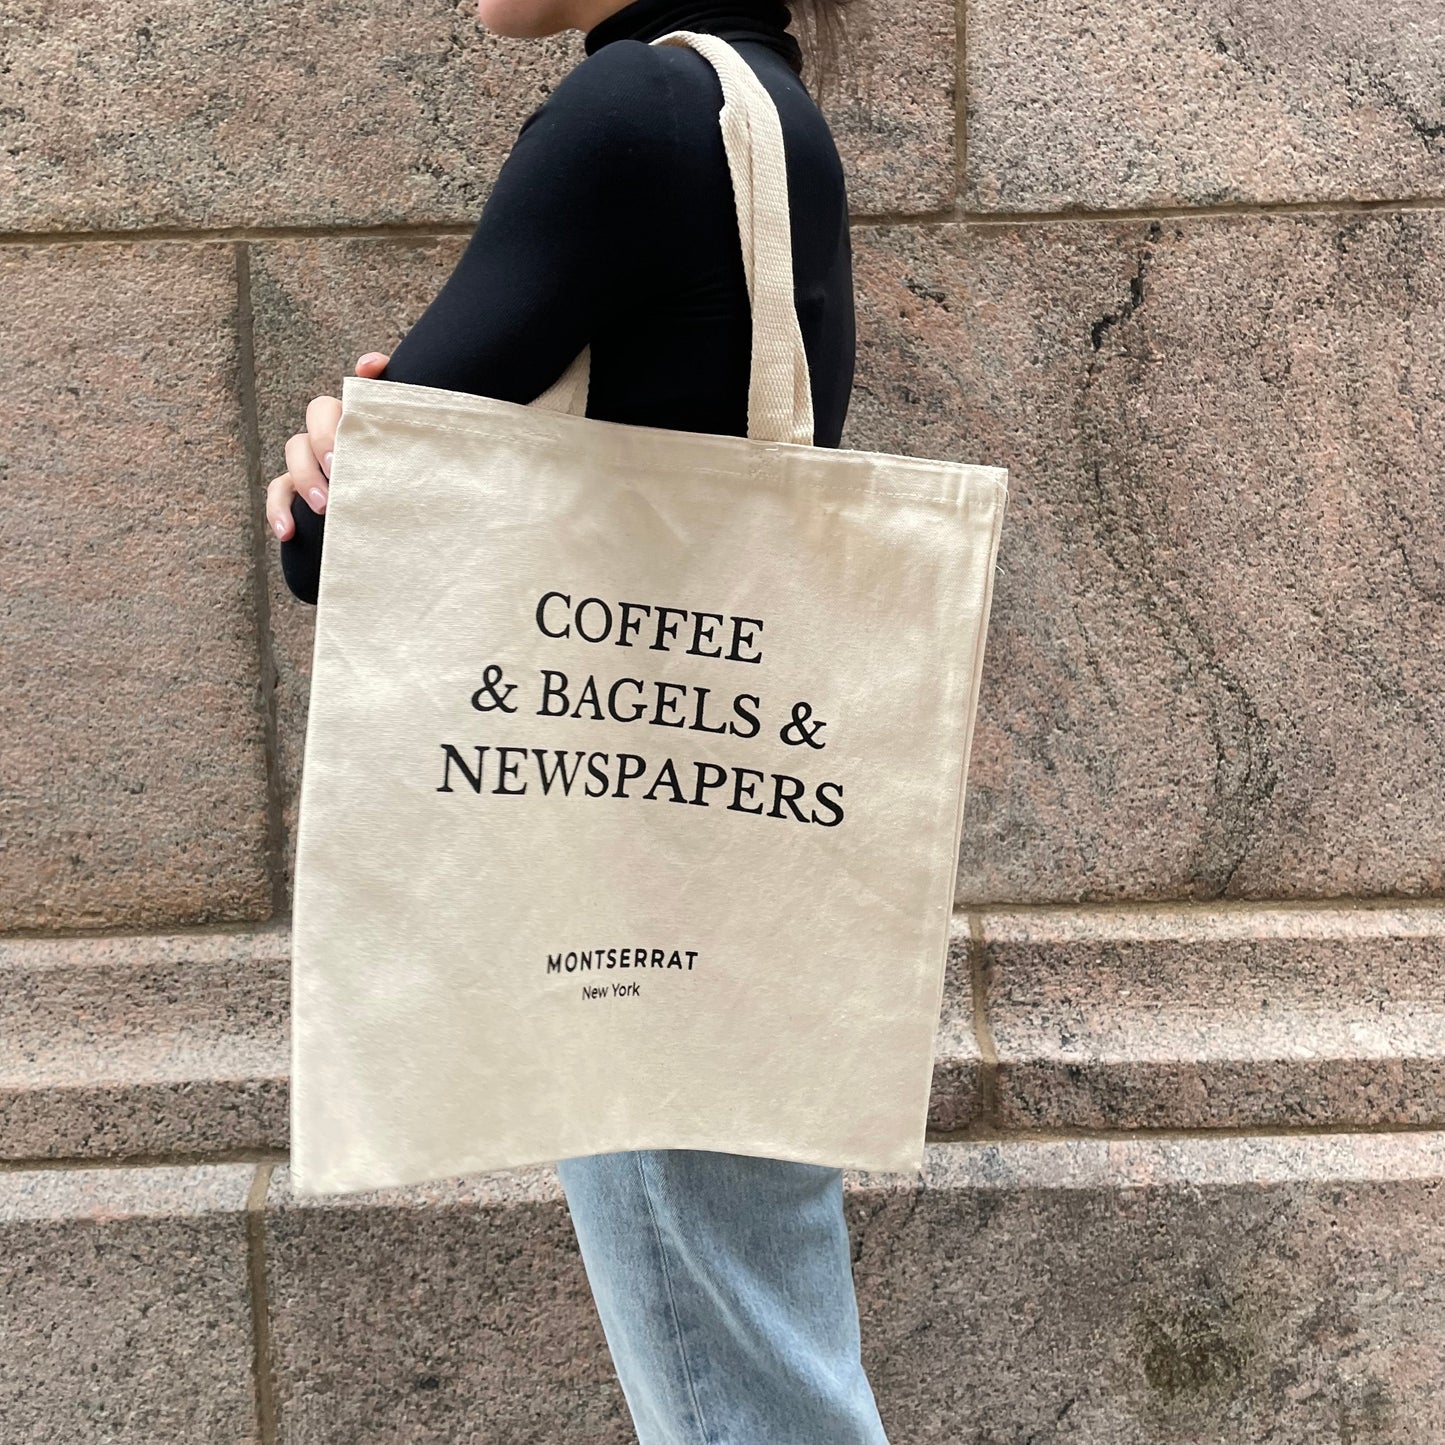 The Sunday Morning Tote